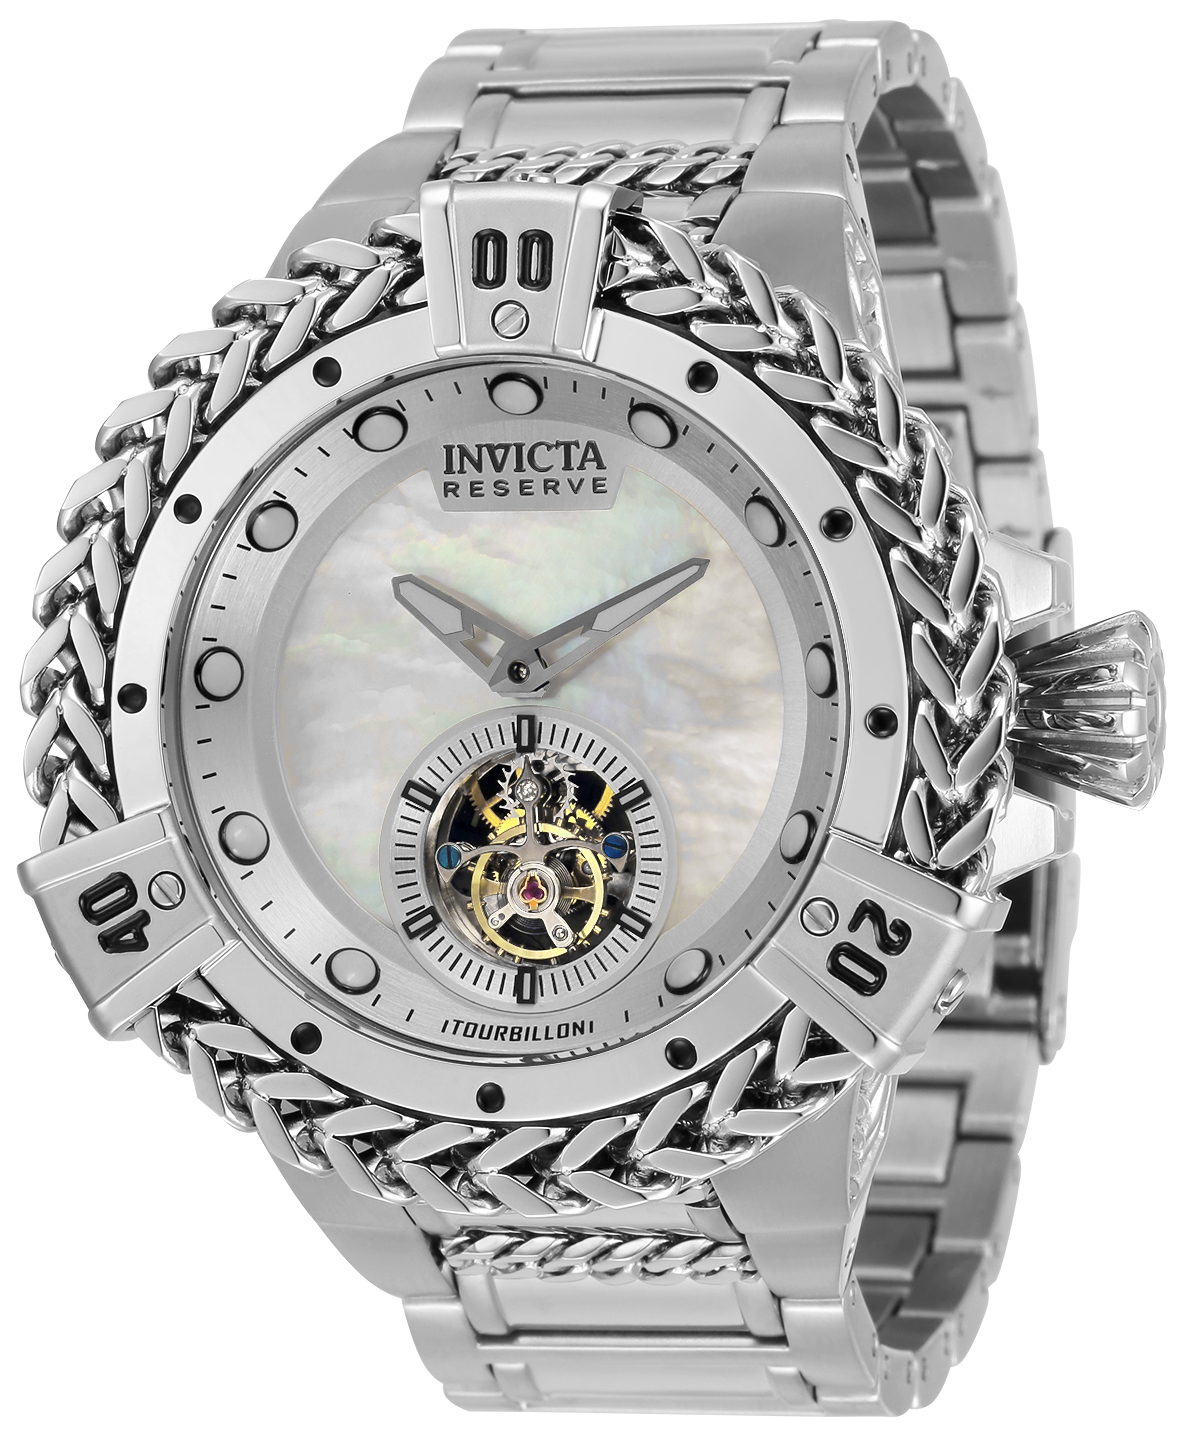 Invicta Bolt Herc Reserve Mechanical Mens Watch - 53mm Stainless Steel Case, Stainless Steel Band, Steel (32853)